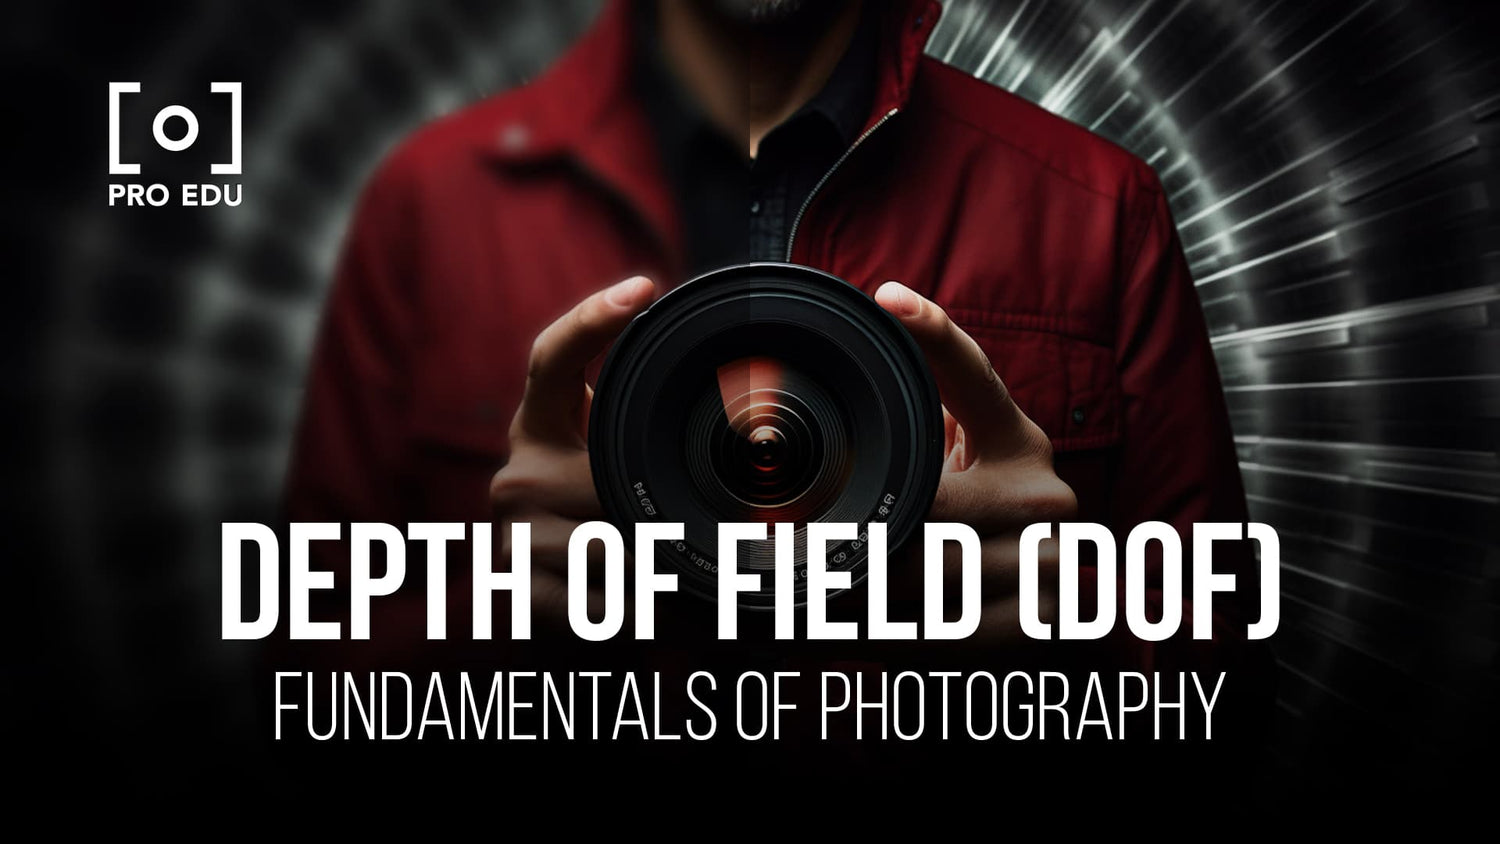 Controlling focus and blur with depth of field techniques in photography